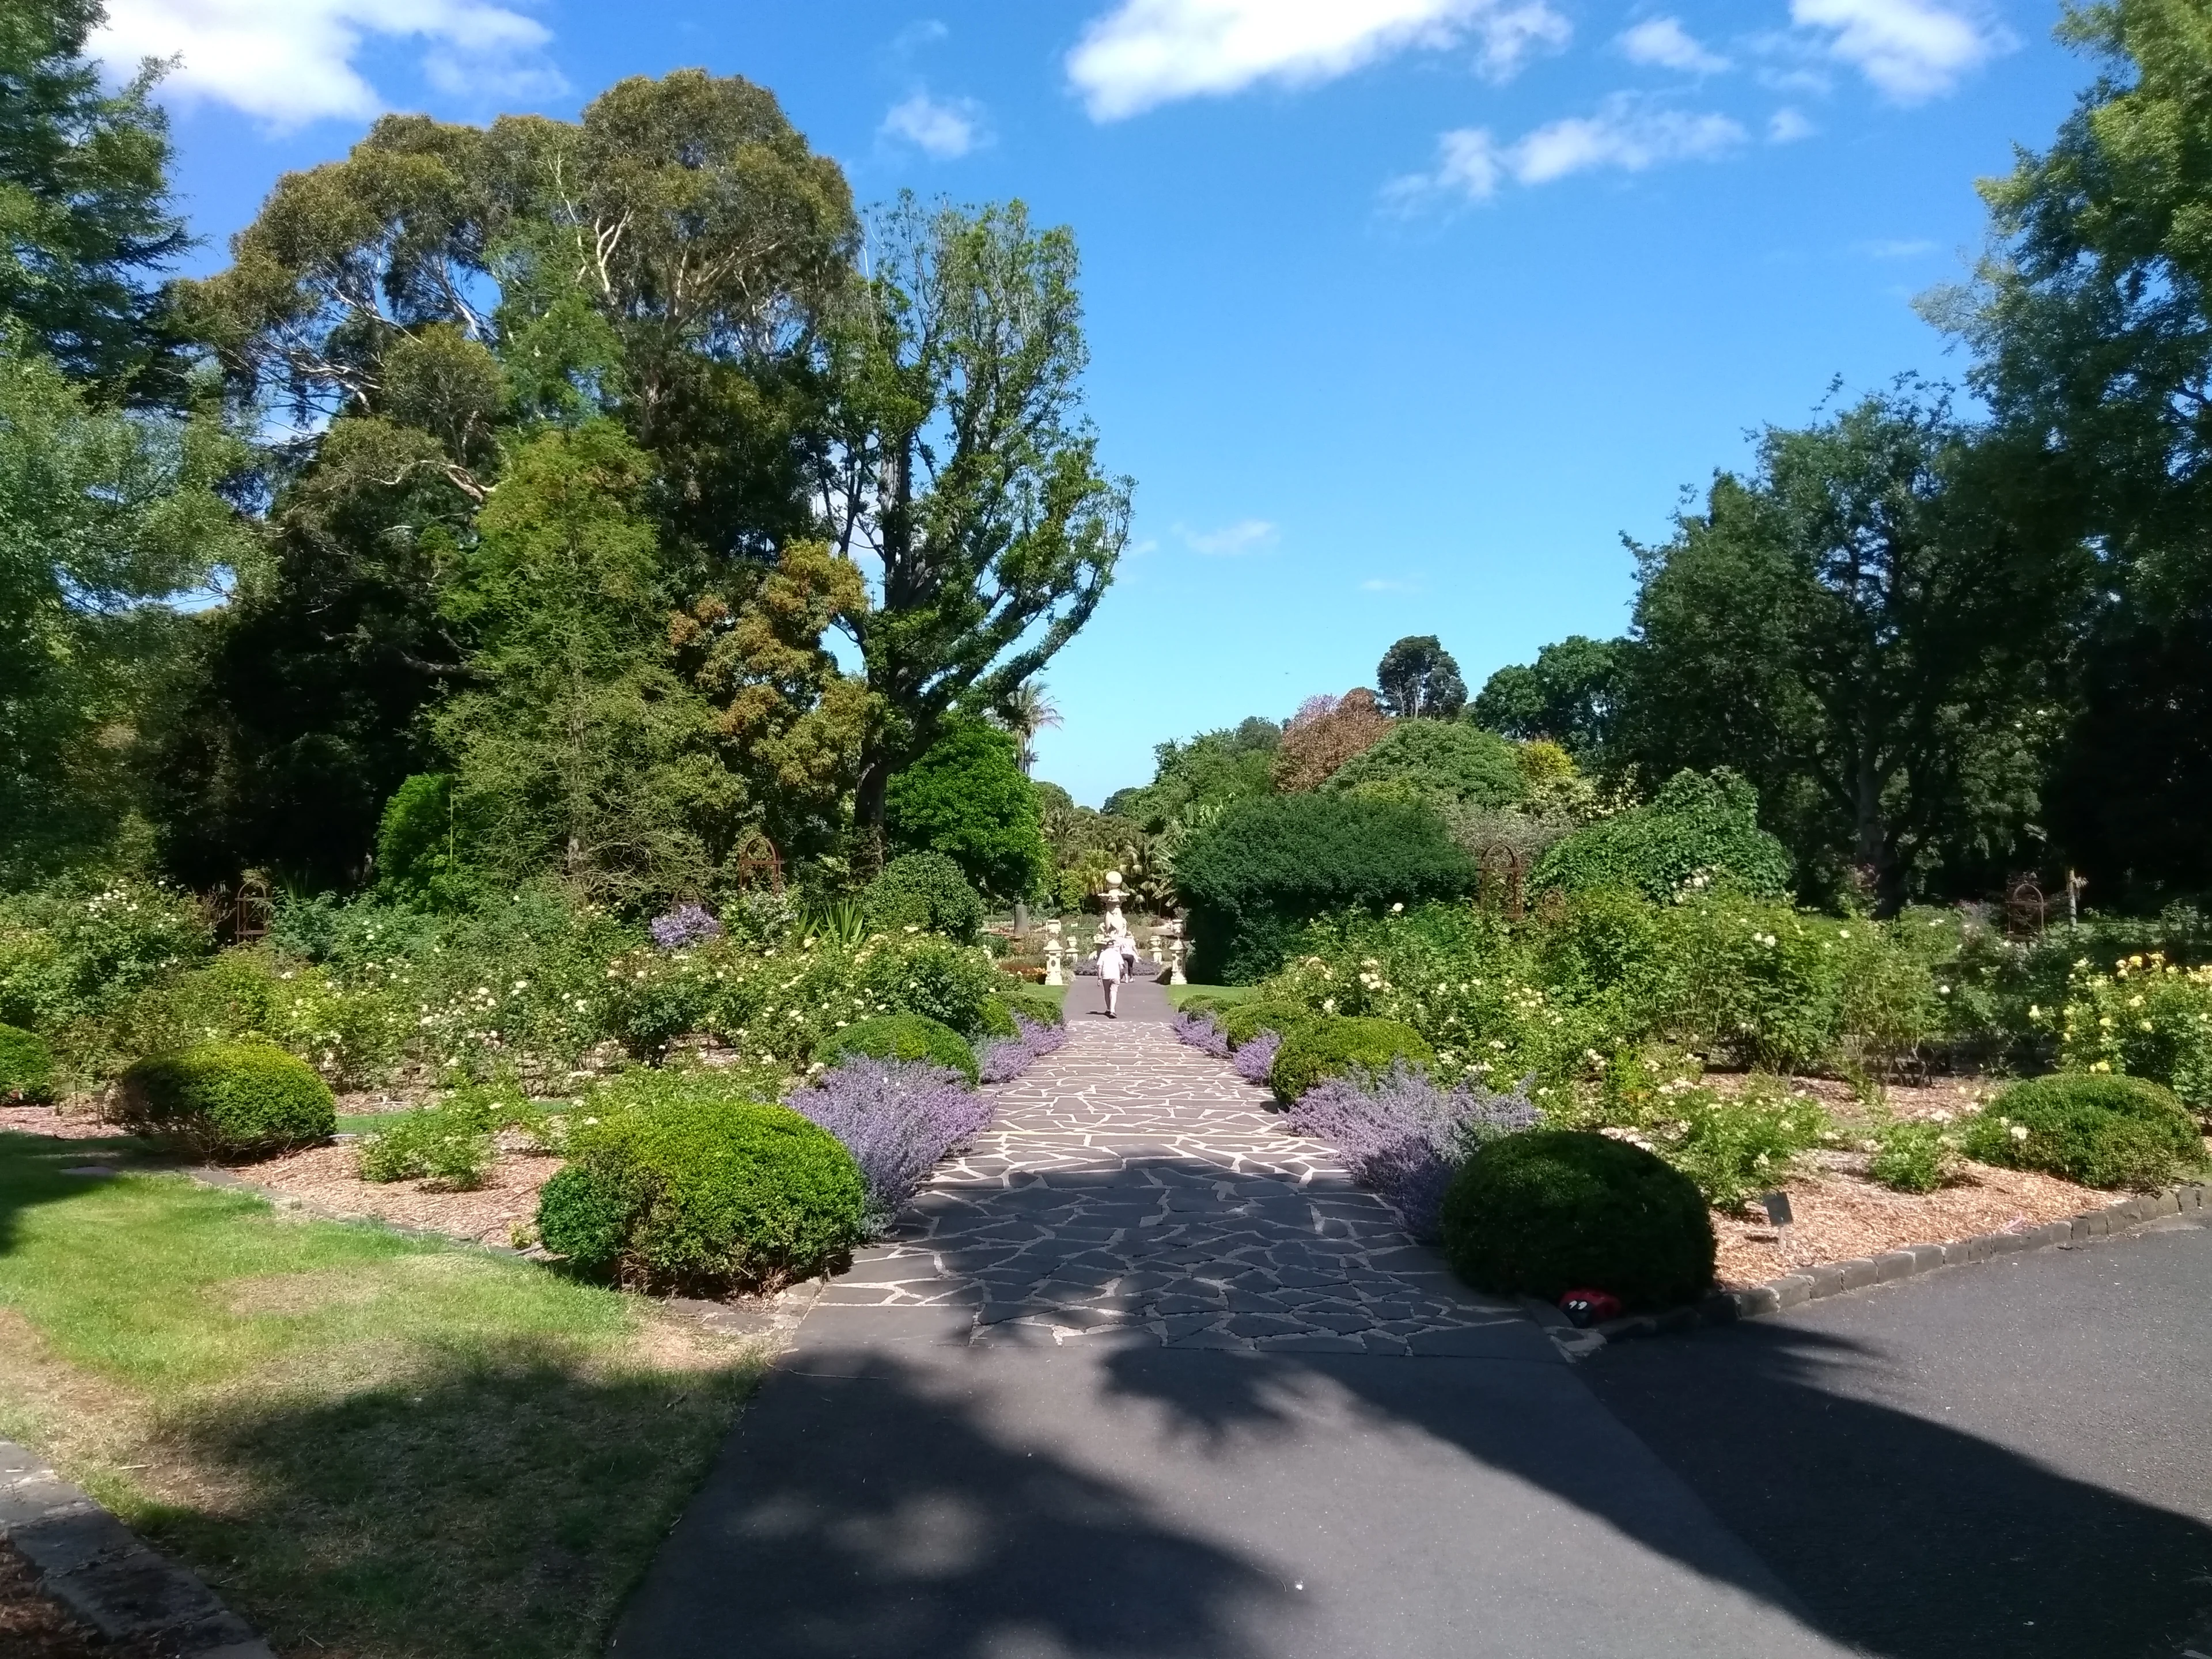 A footpath in the Geelong Botanical Gardens.